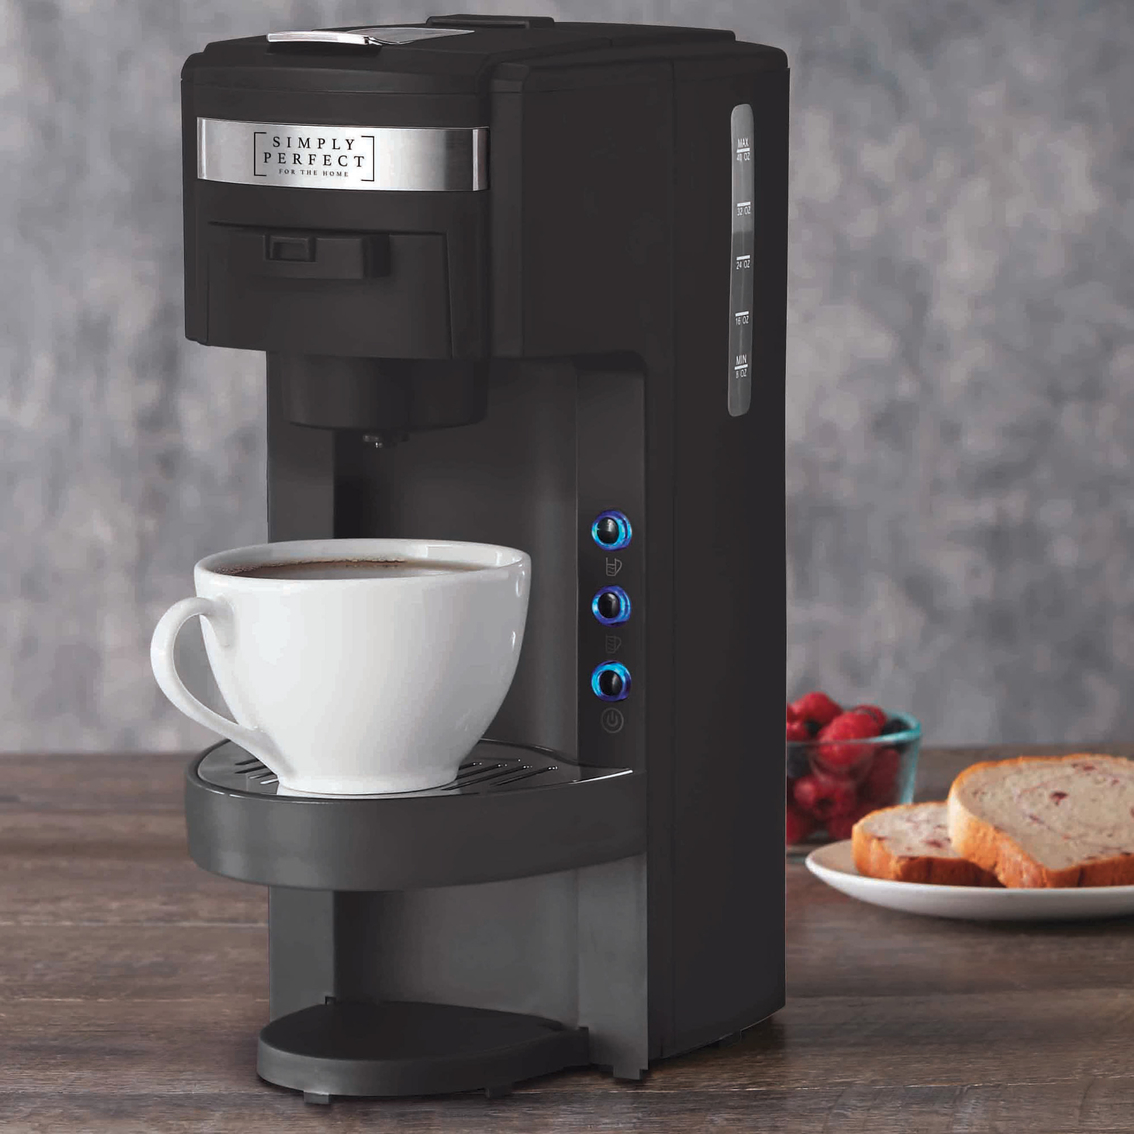 Simply Perfect Single Serve Coffee Maker 220V - Image 2 of 3